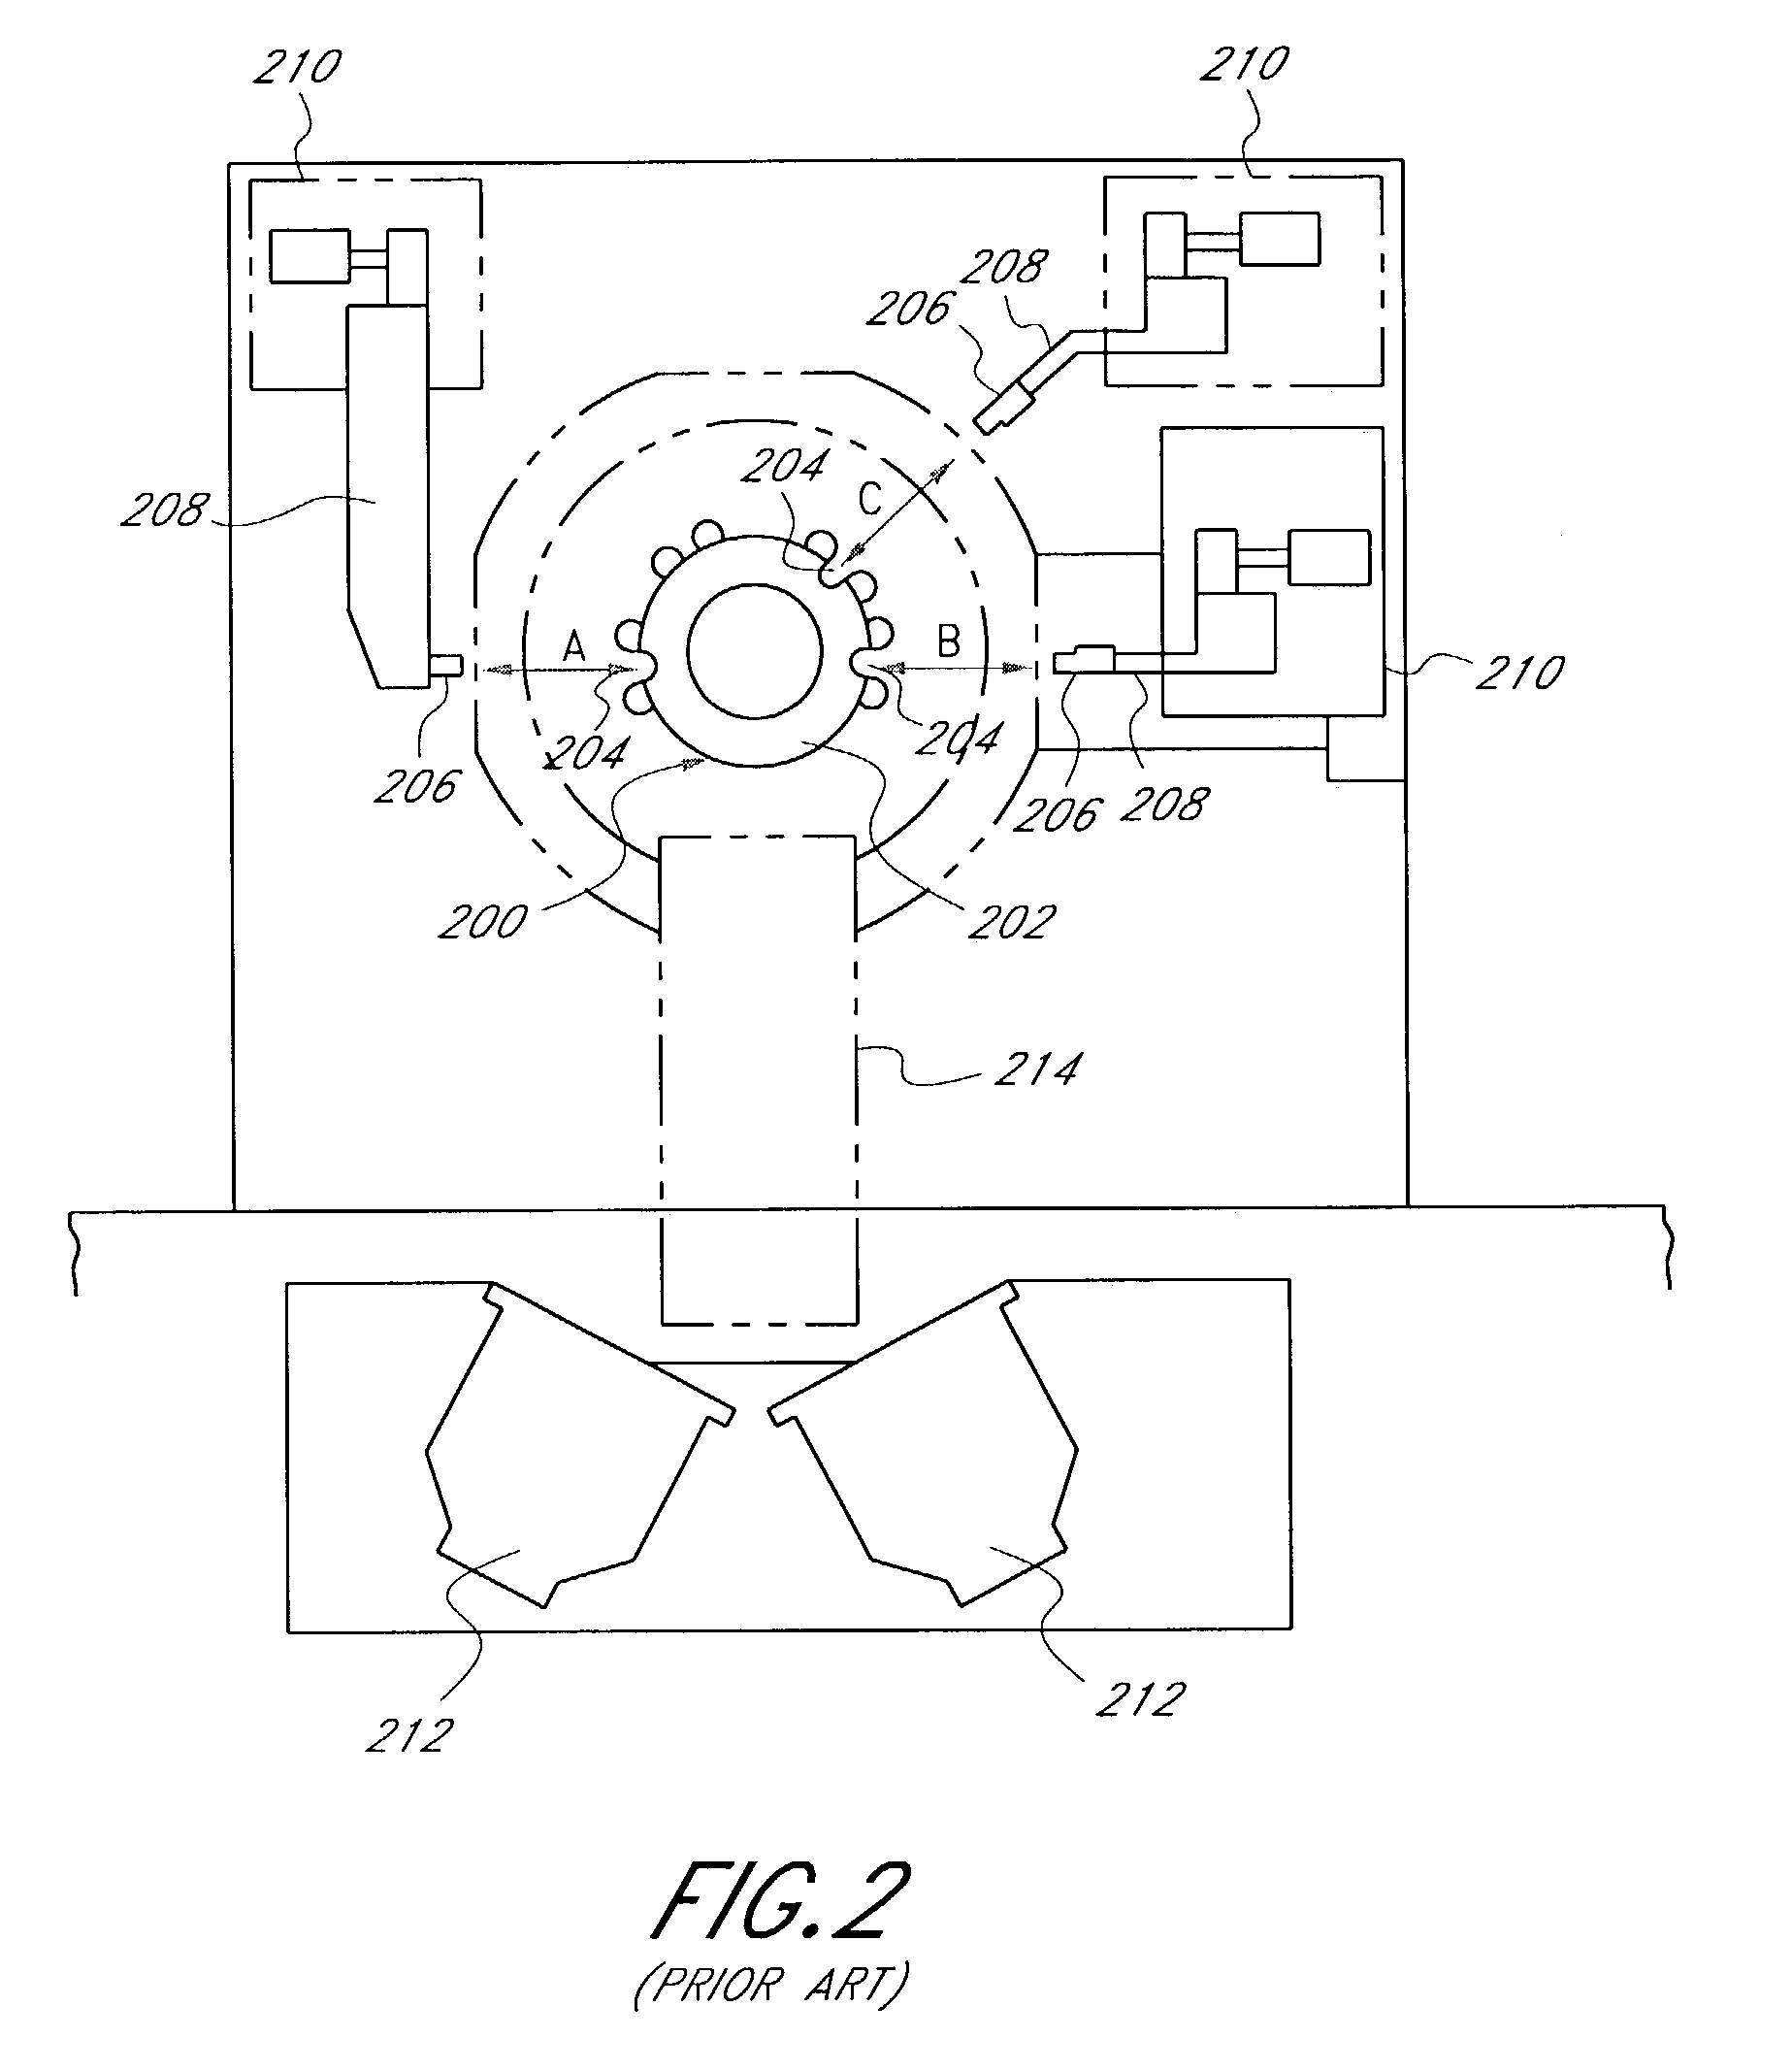 Method and apparatus for loading a batch of wafers into a wafer boat